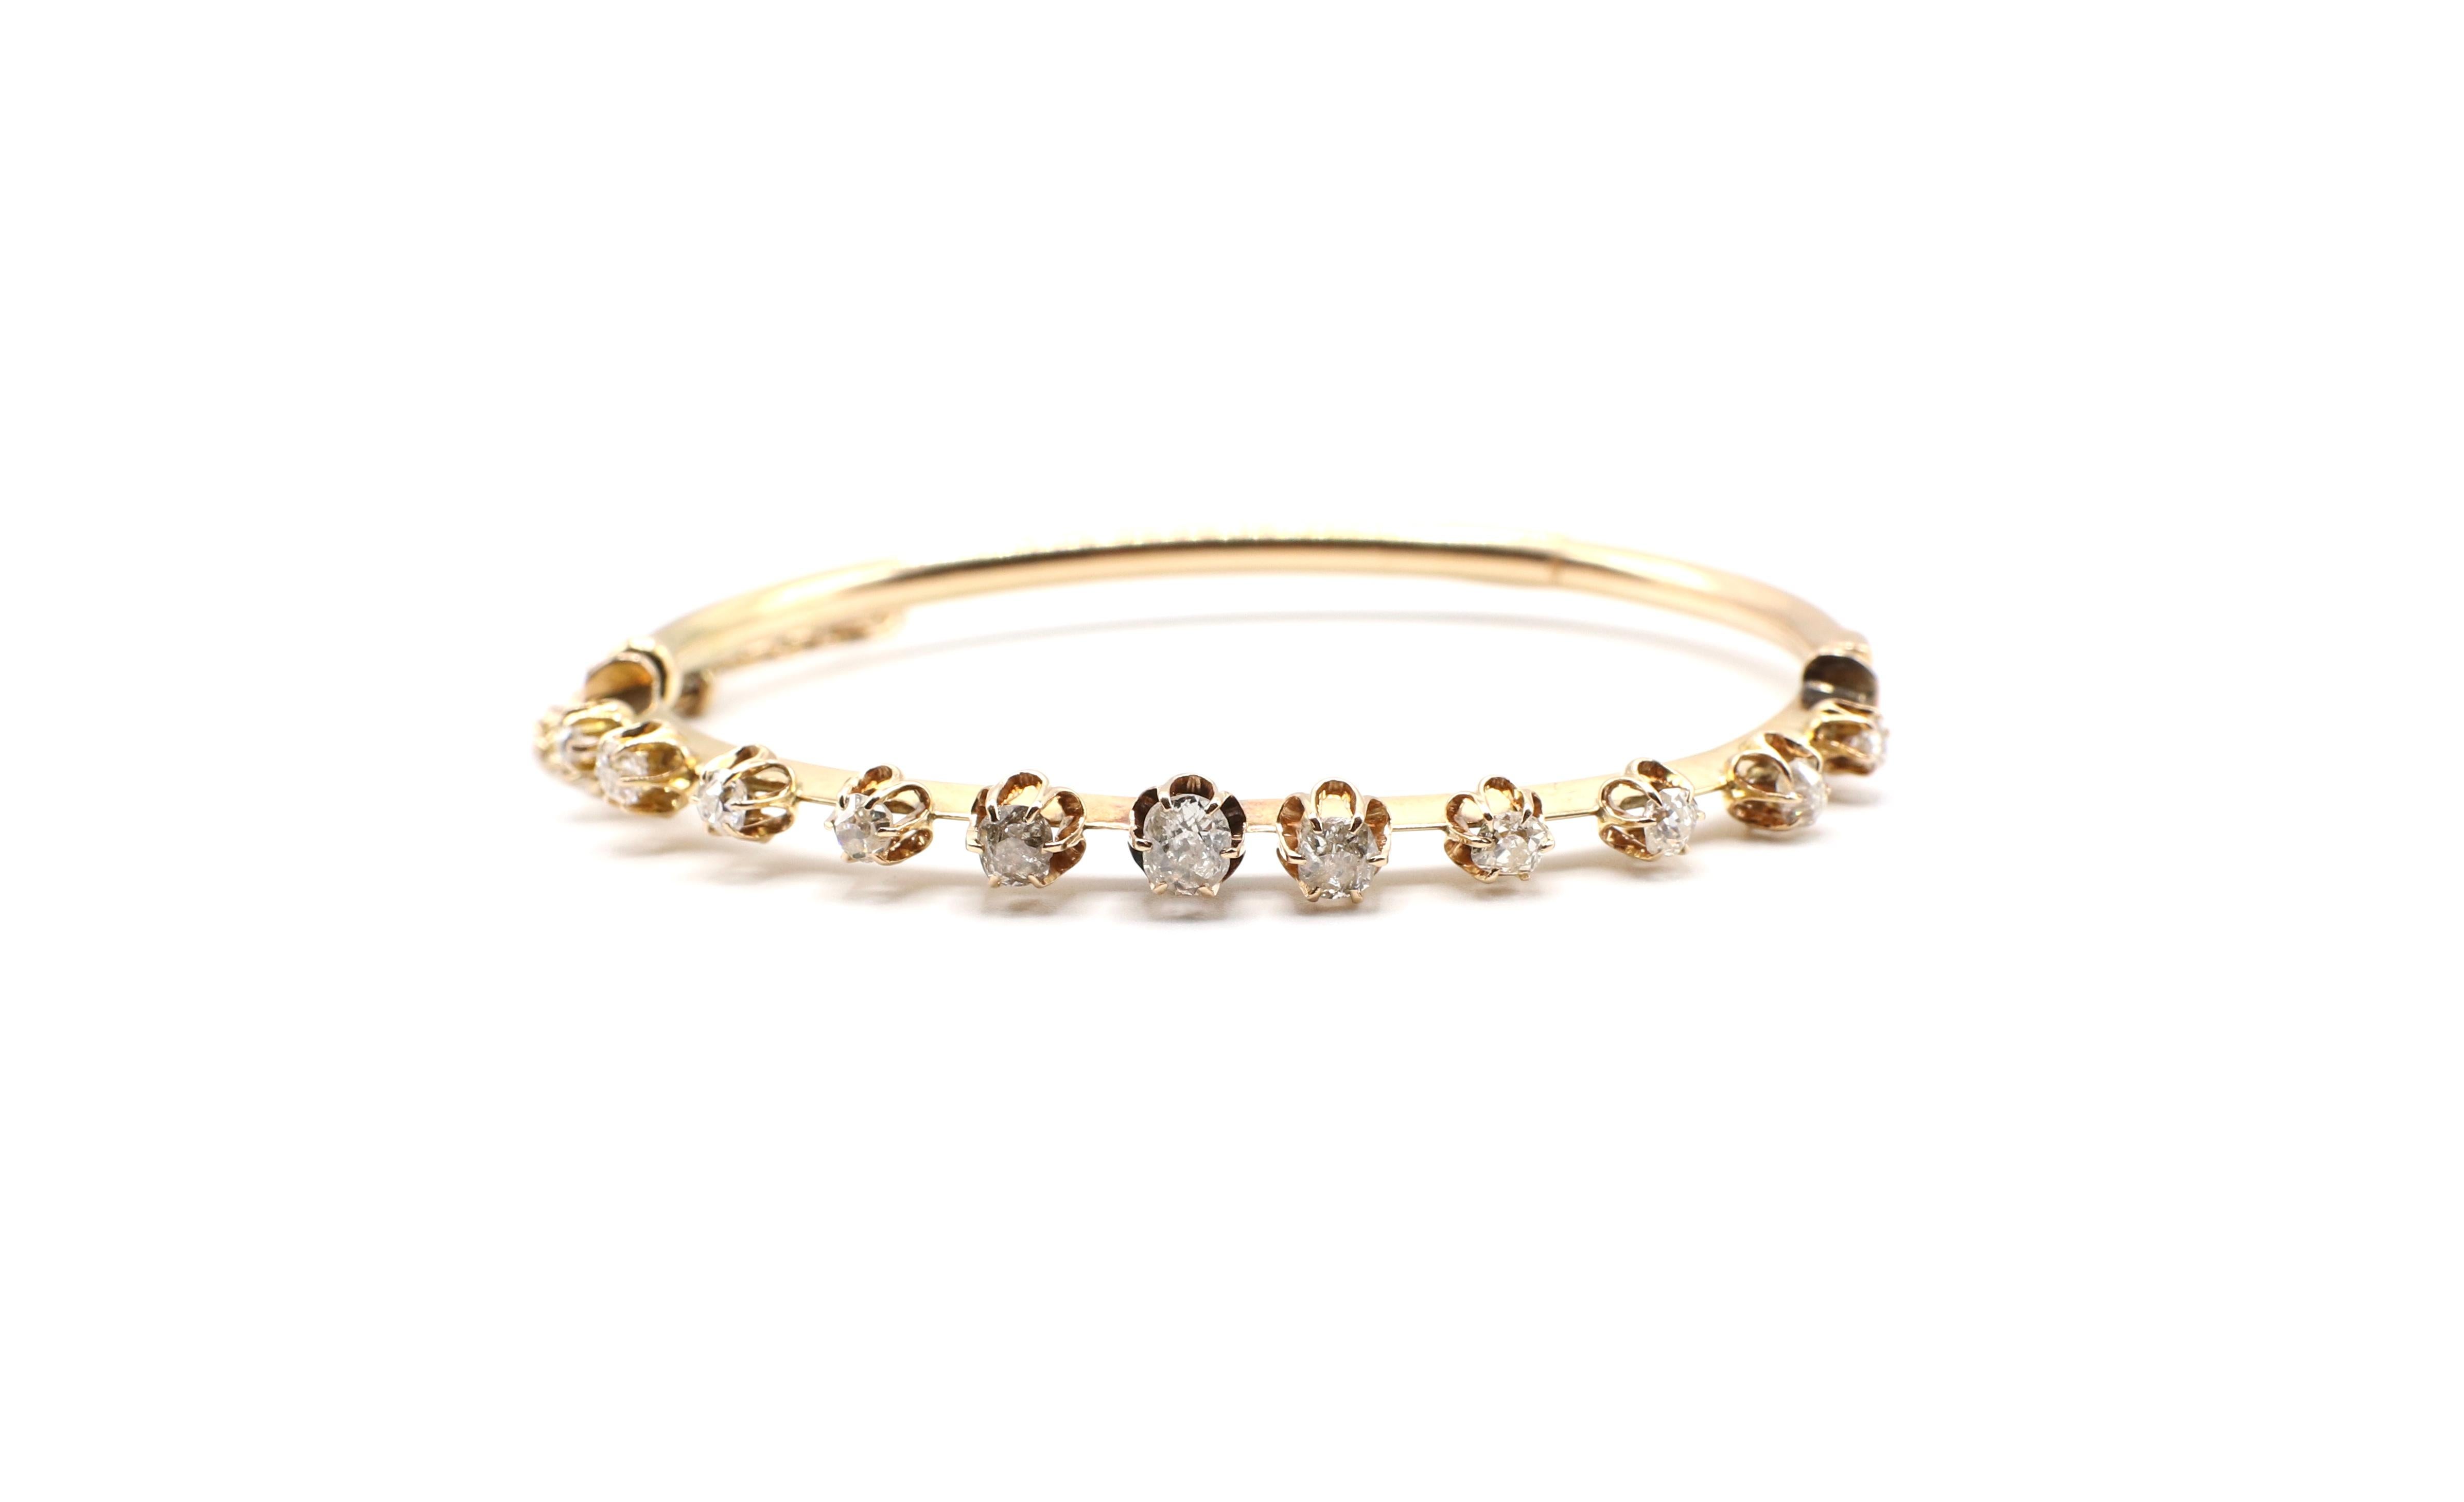 For sale is an original antique Victorian 14K Yellow Gold Mine Cut Diamond Bangle Bracelet with 2 CTW of diamonds. 

Metal: 14K yellow gold
Weight: 3.1 grams
Diamonds: 11 mine cut diamonds, approx. 2 CTW H SI - I1 
Width: 2.25 inches
Safety chain